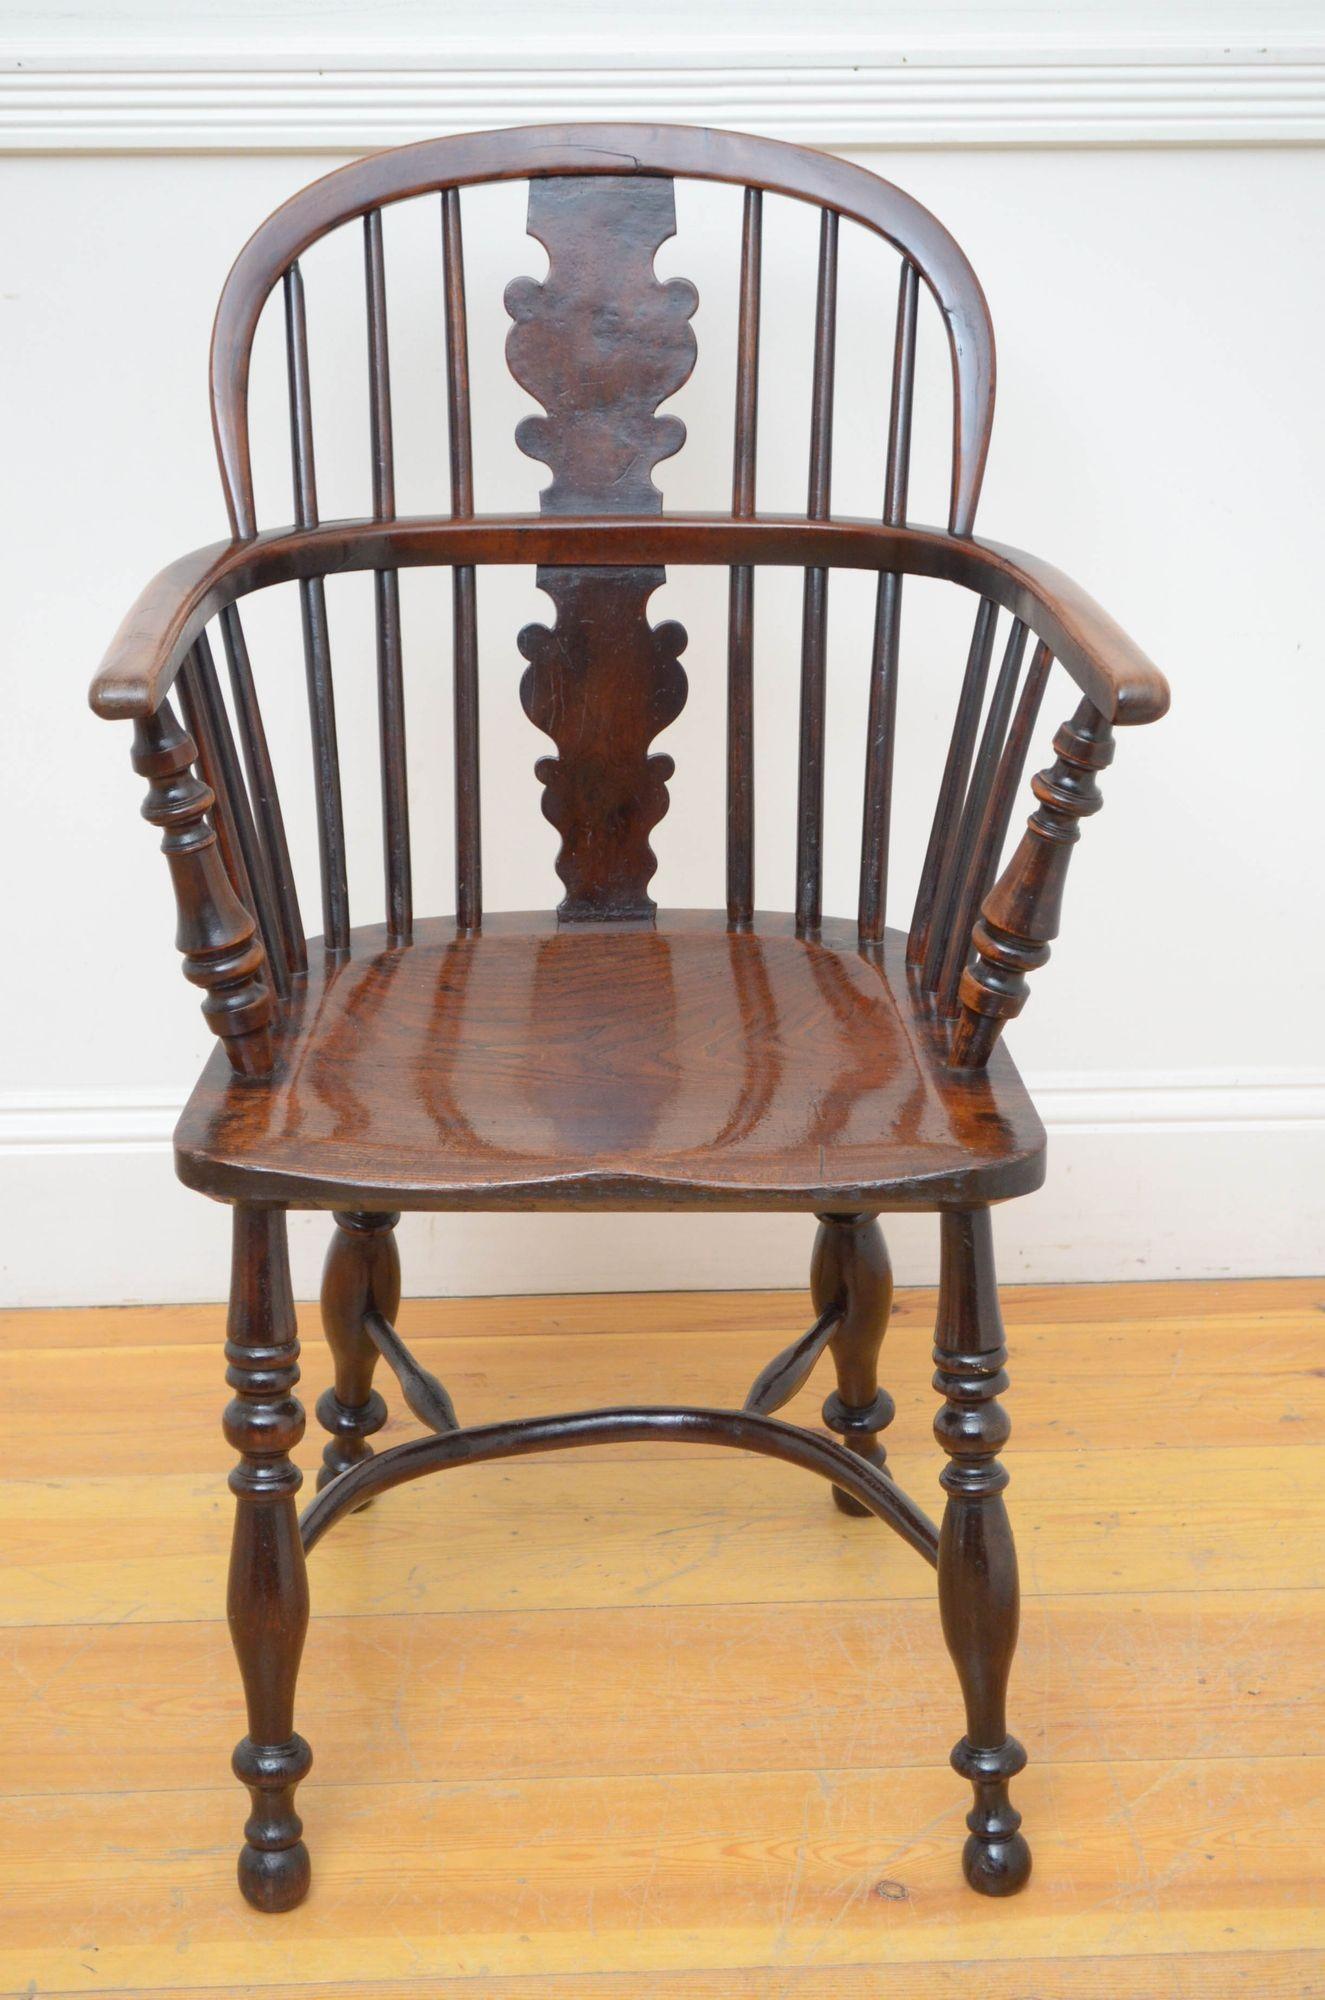 St042 Early Victorian Windsor chair in ash and elm wood, having arched back with centre splat flanked by spindles, open arms and ash seat, standing on turned legs united by crinoline stretchers. This antique chair is in home ready condition.